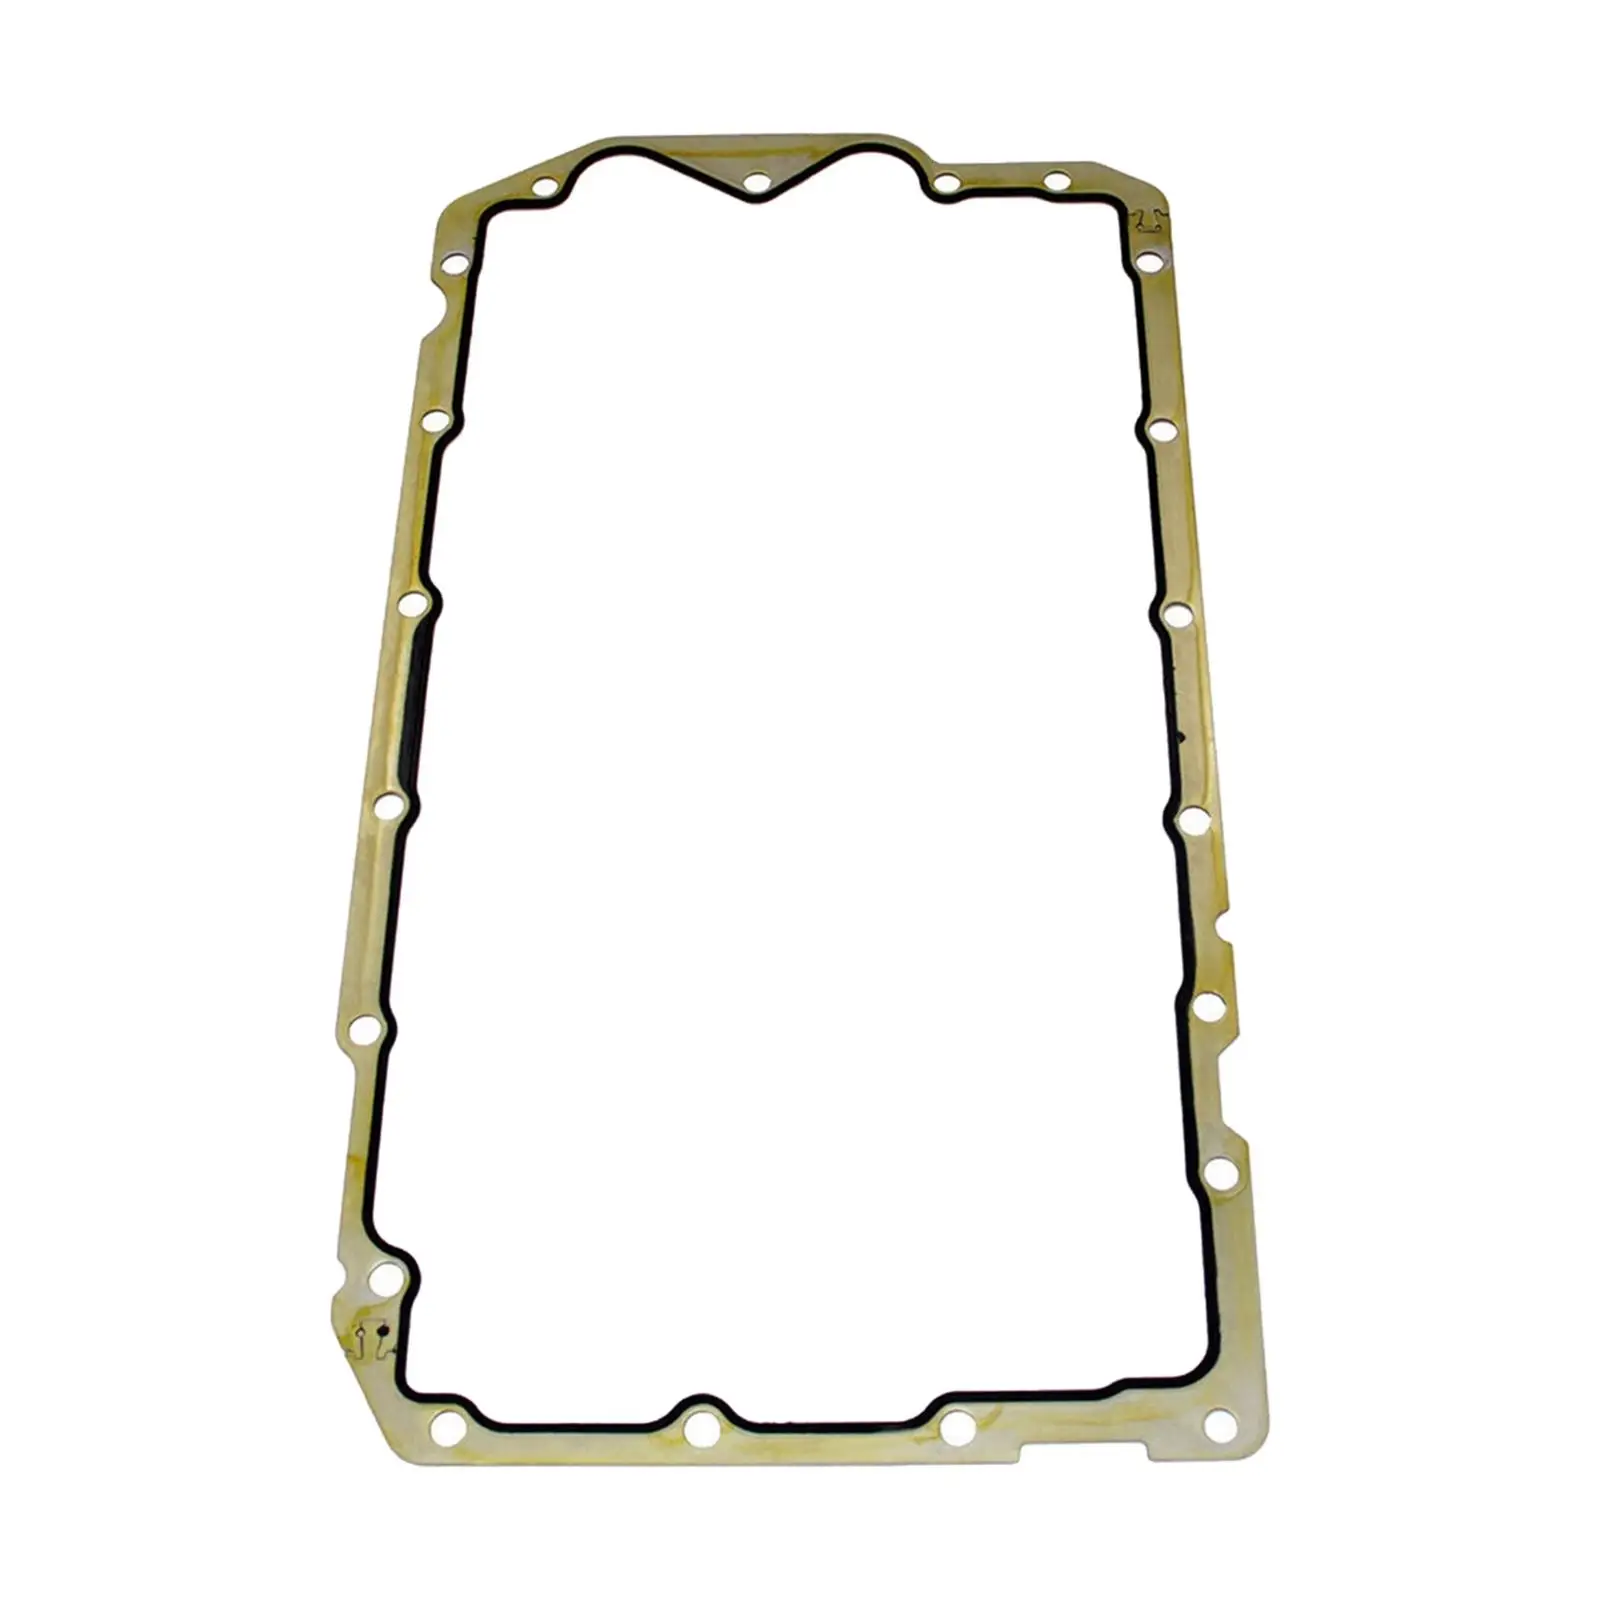 Parts Oil Pan Gasket Set Replacement Cars Spare Parts 45x24cm High Performance Engine Oil Pan Gasket Oil Pan Gasket